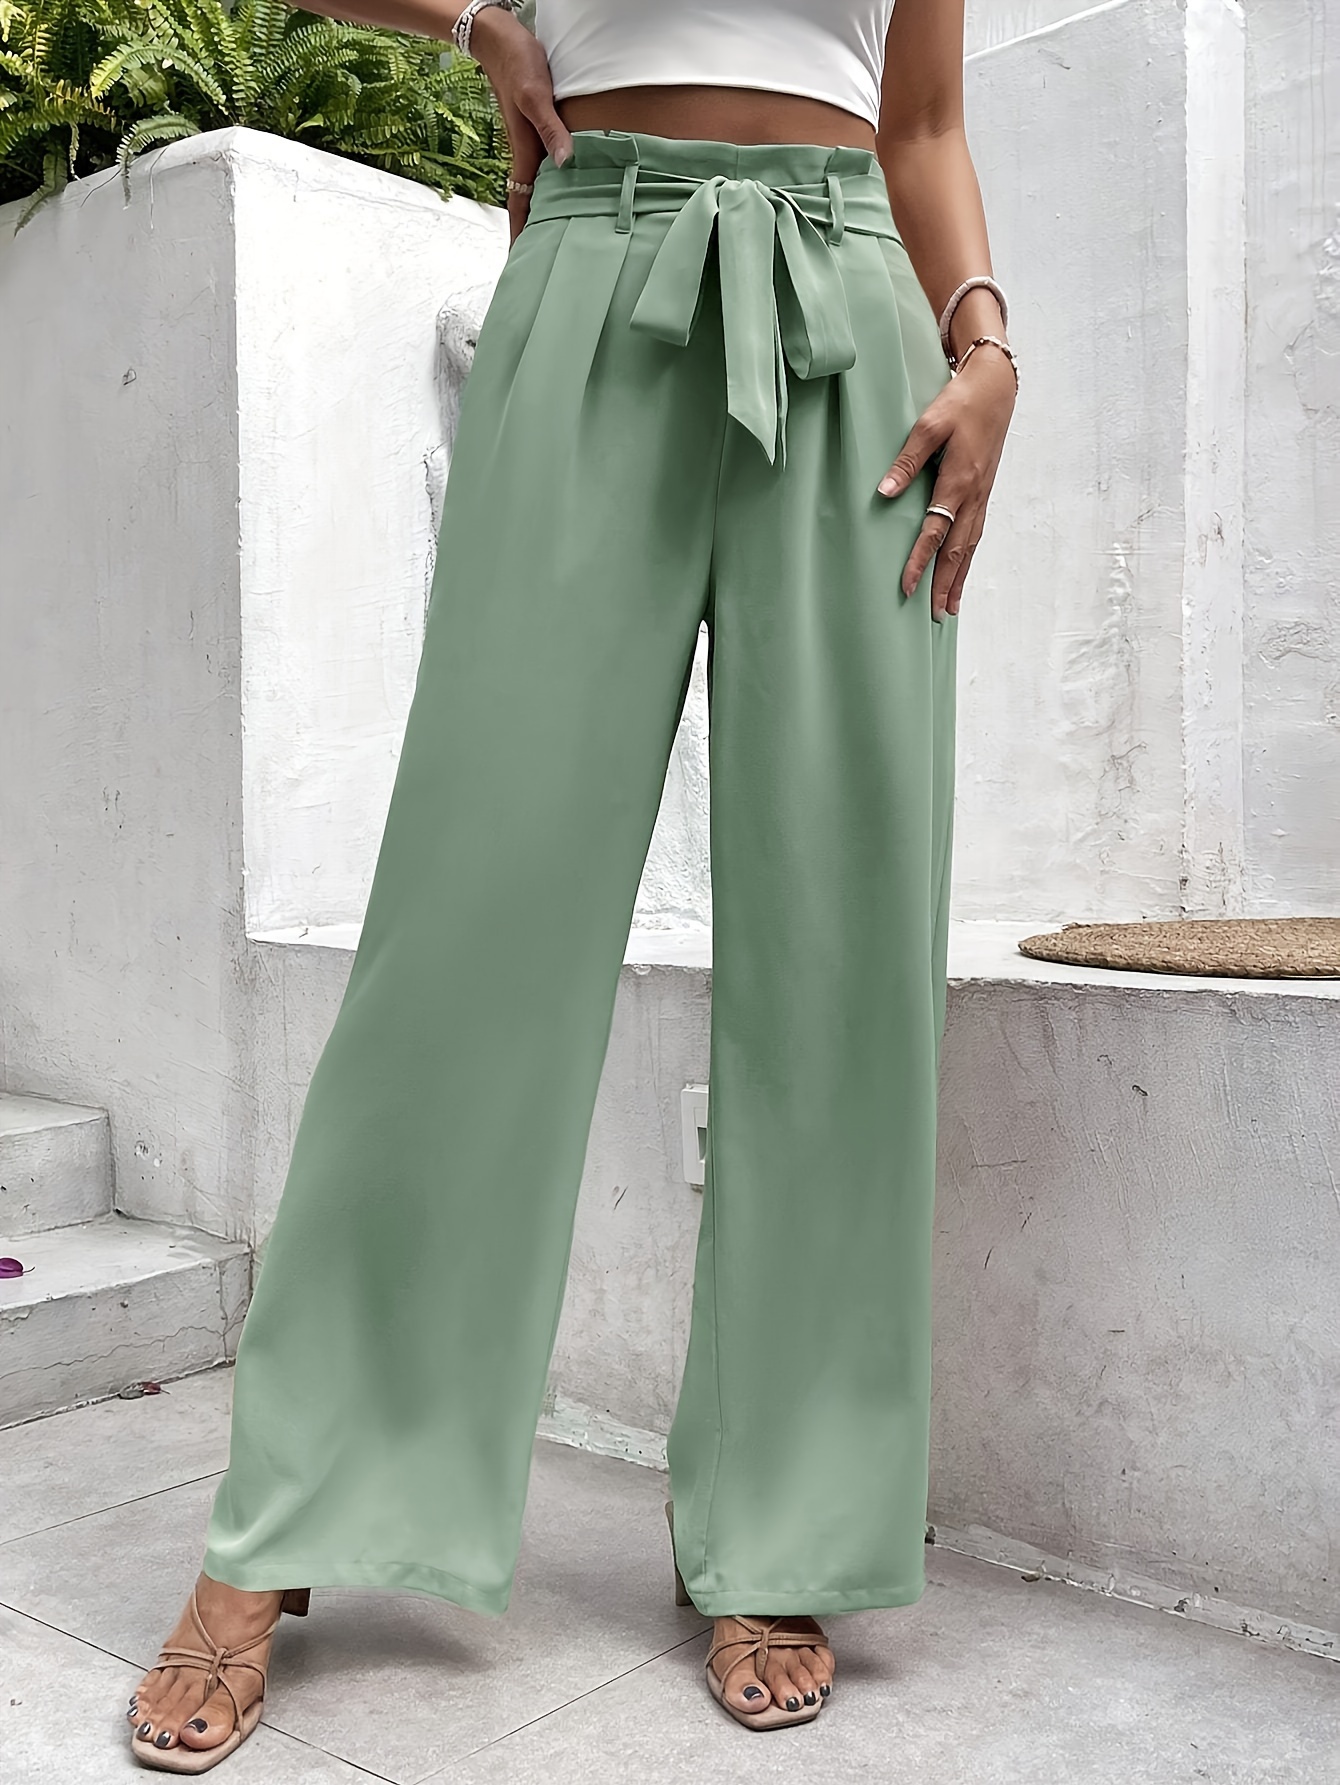 Cedar Olive Green Belted High-Waisted Pants  Olive green pants, High  waisted pants, Green pants